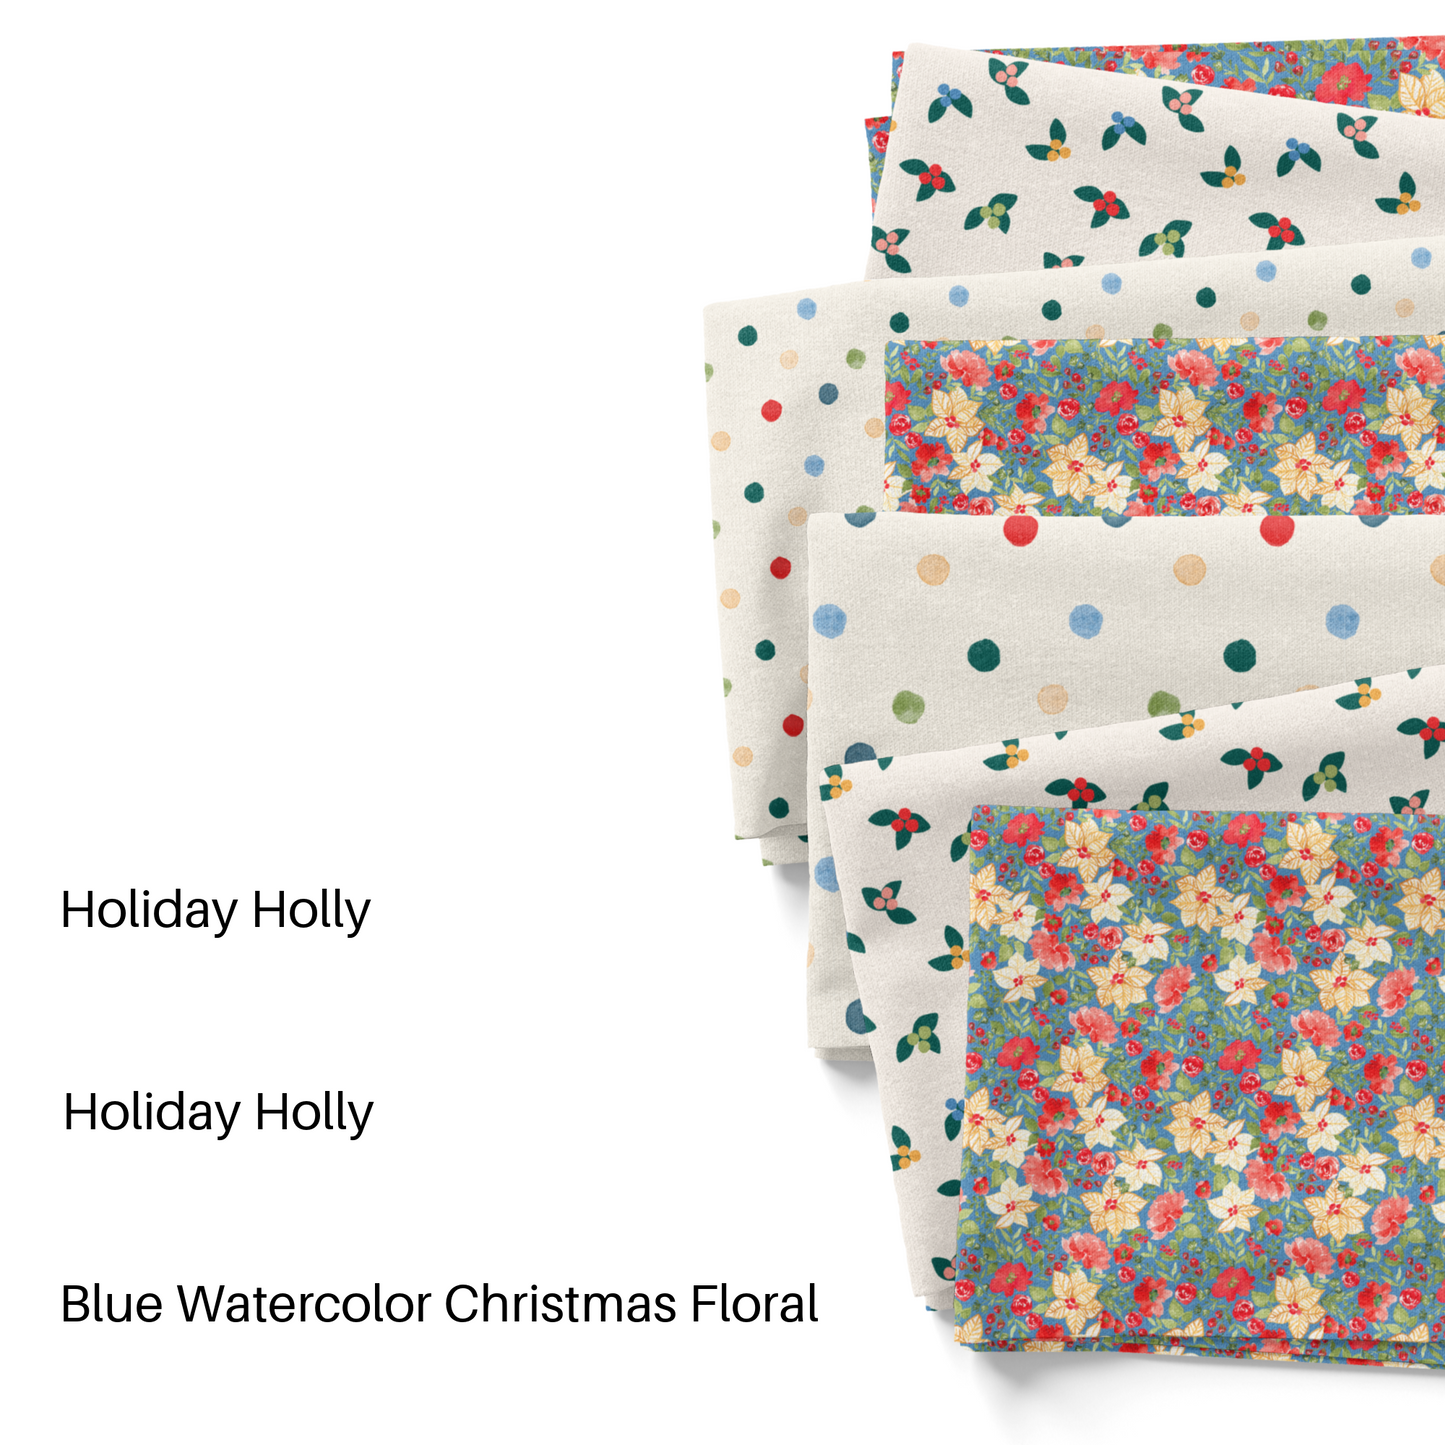 Blue Watercolor Christmas Floral Fabric By The Yard